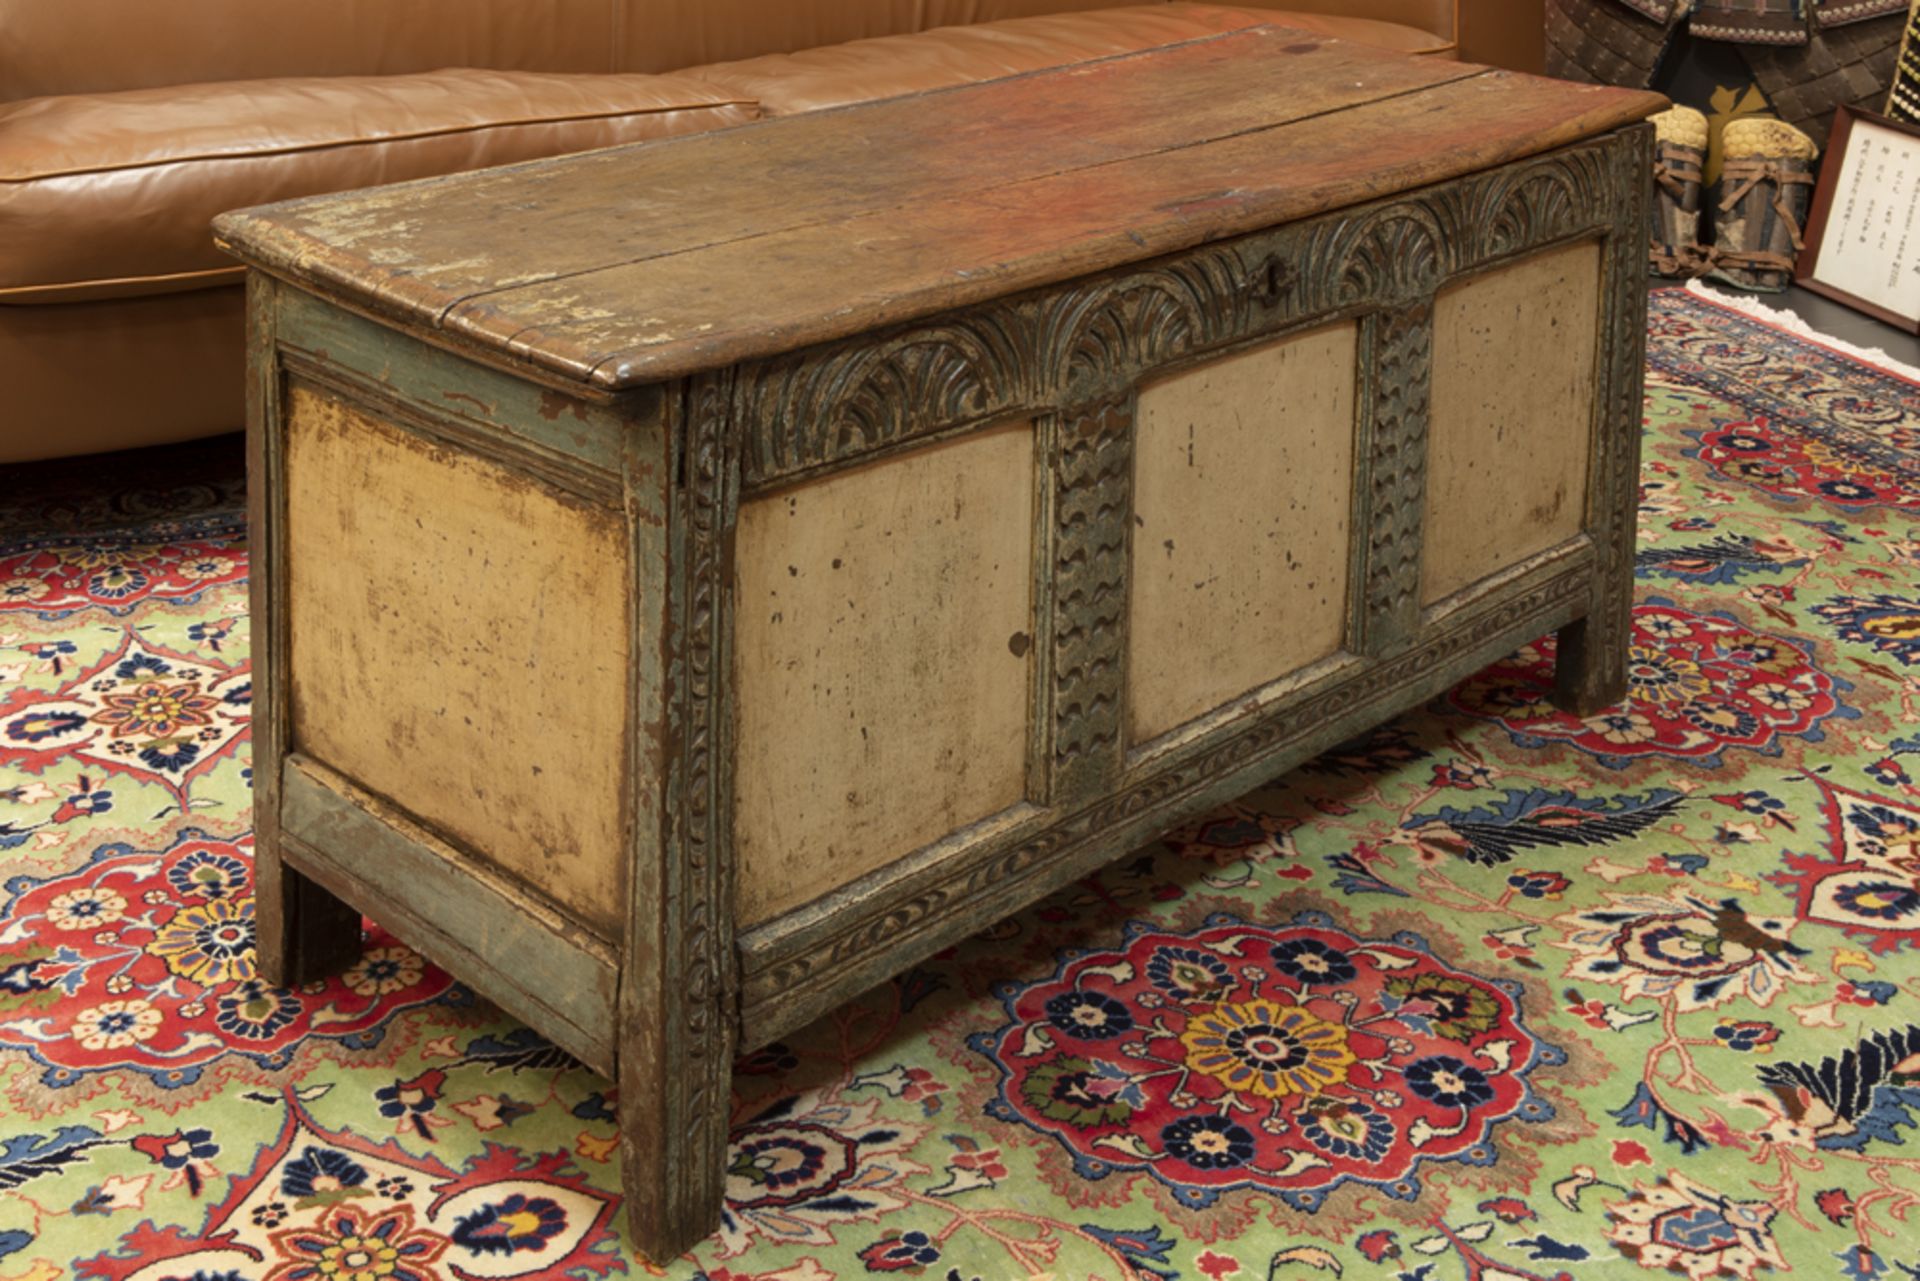 18th Cent. English chest in oak with later polychromy || Achttiende eeuwse Engelse koffer in later